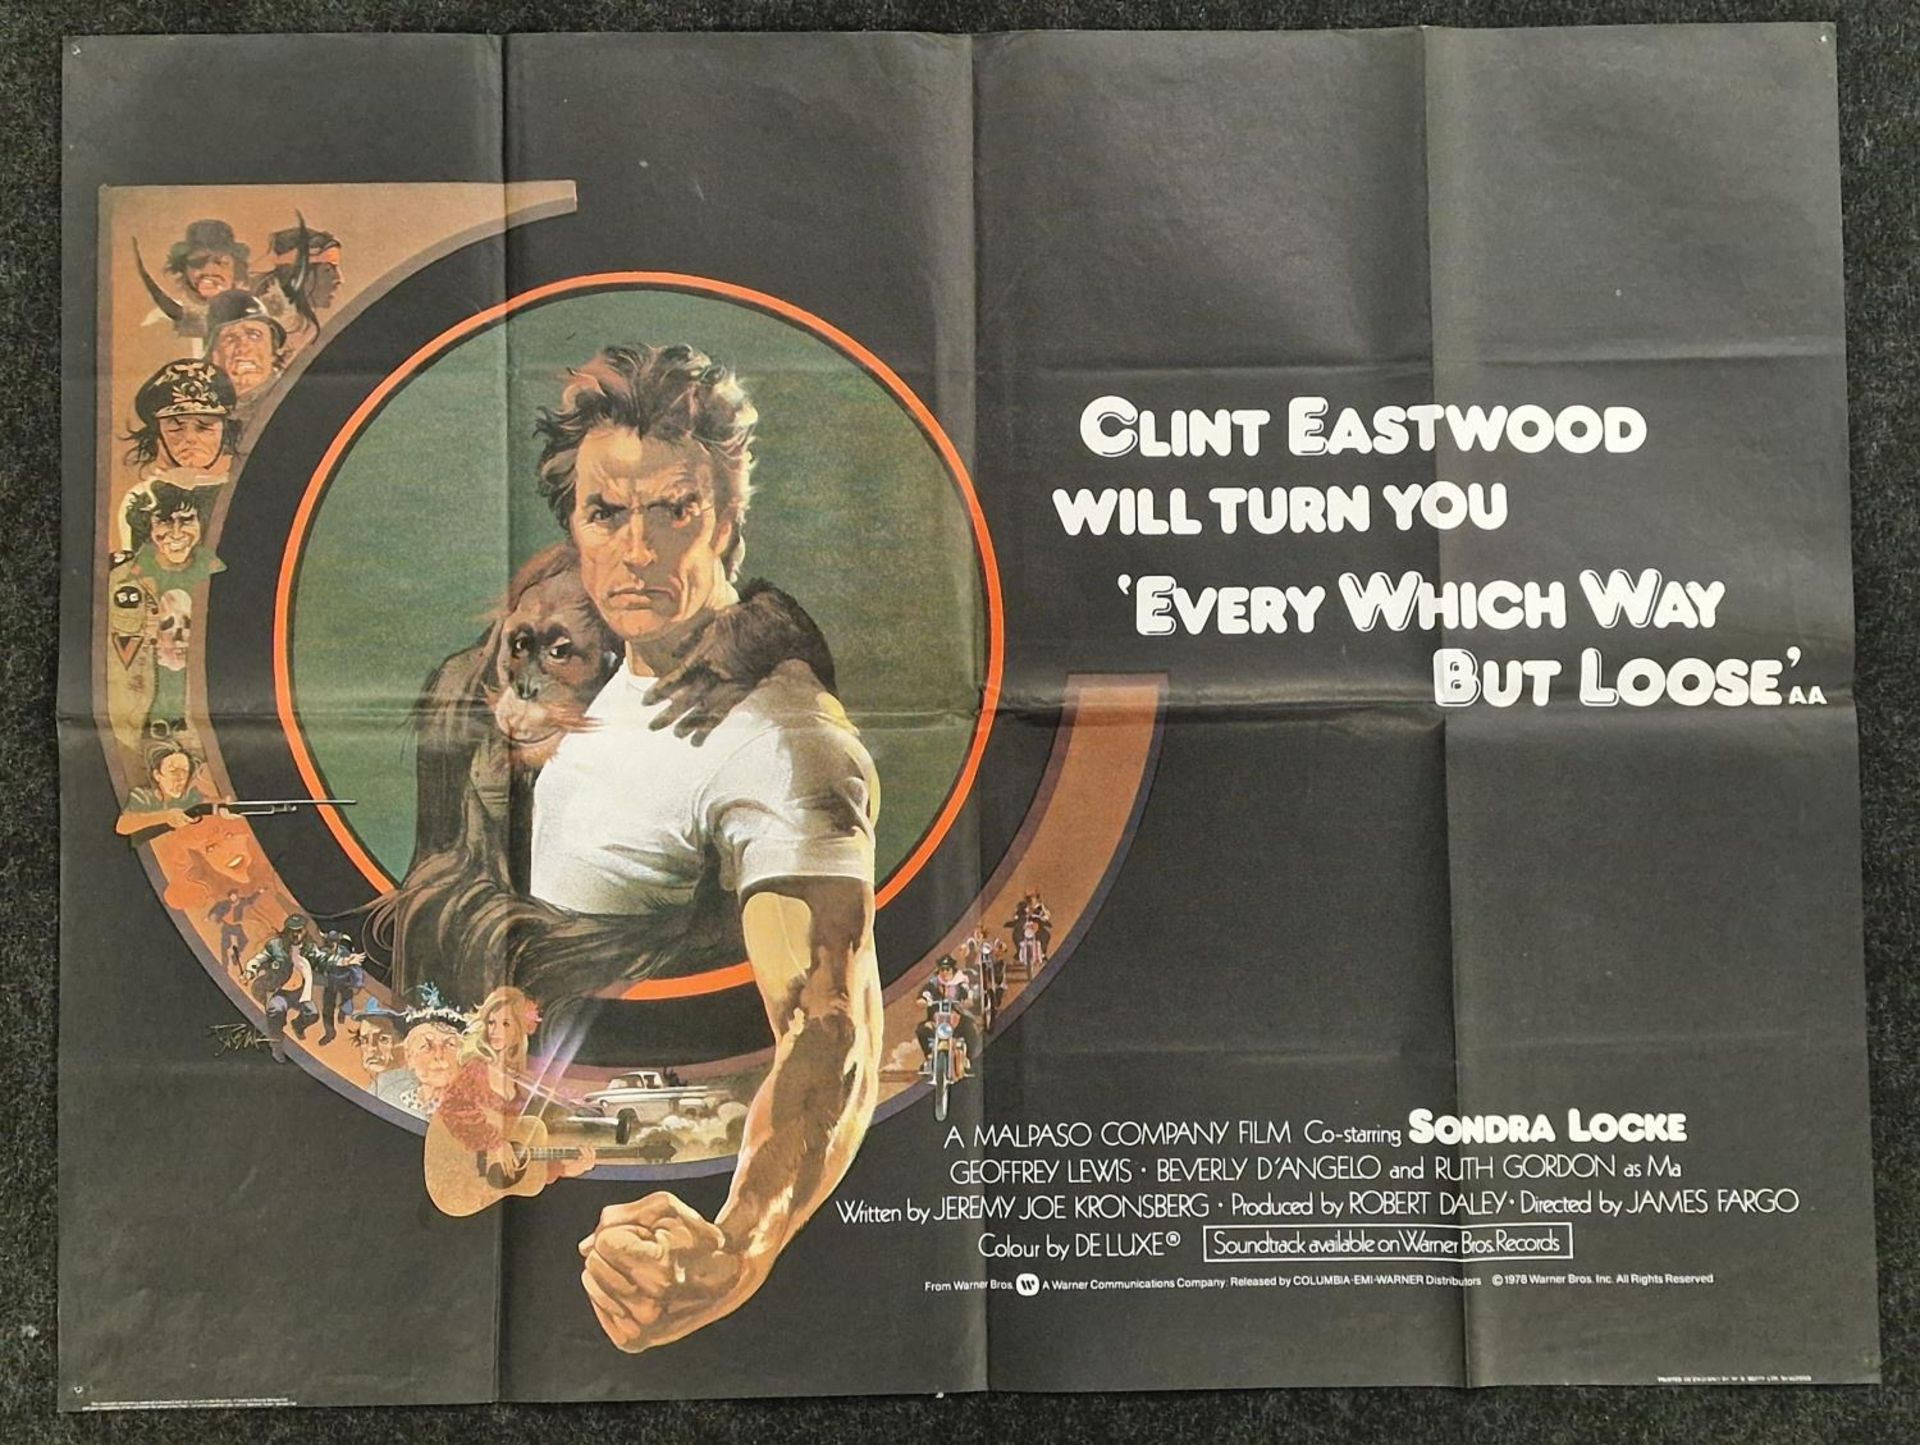 "Every Which Way But Loose" original vintage folded quad film poster 1978 starring Clint Eastwood